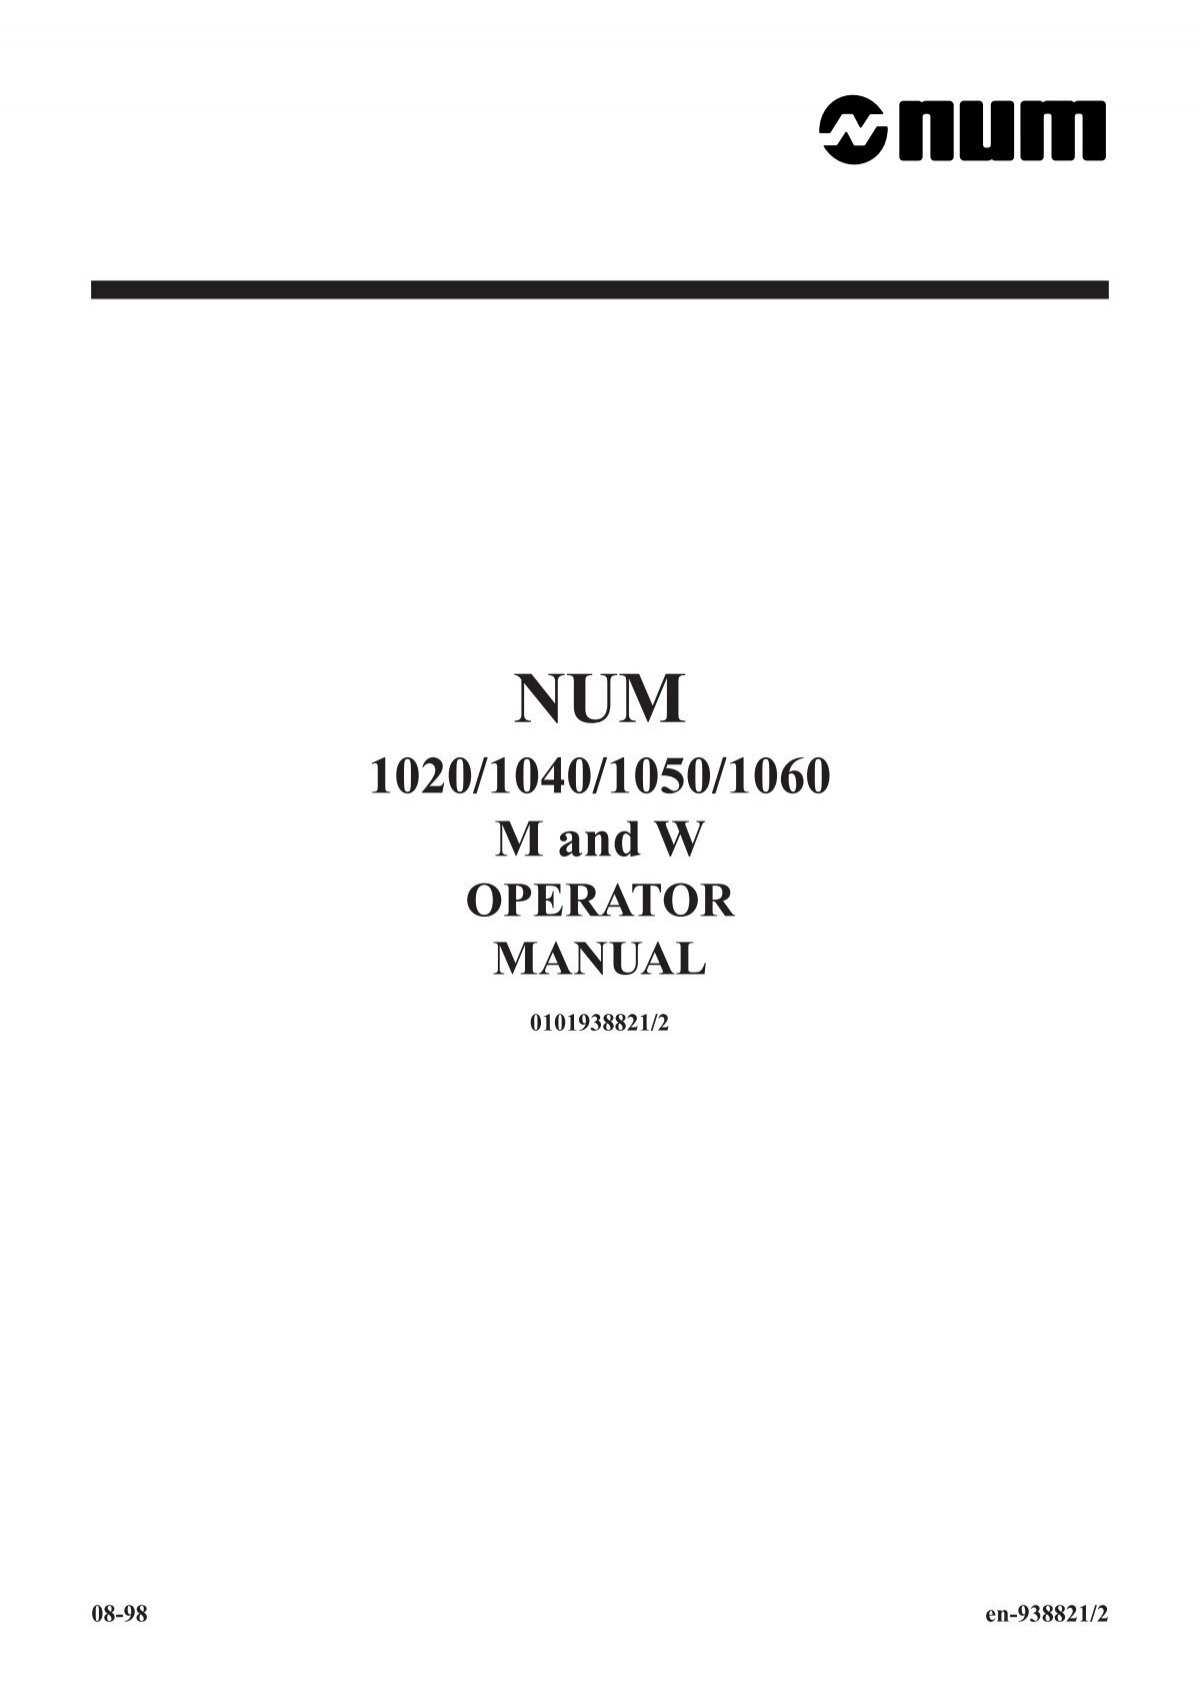 Num 10 1040 1050 1060 M And W Operator Manual Free